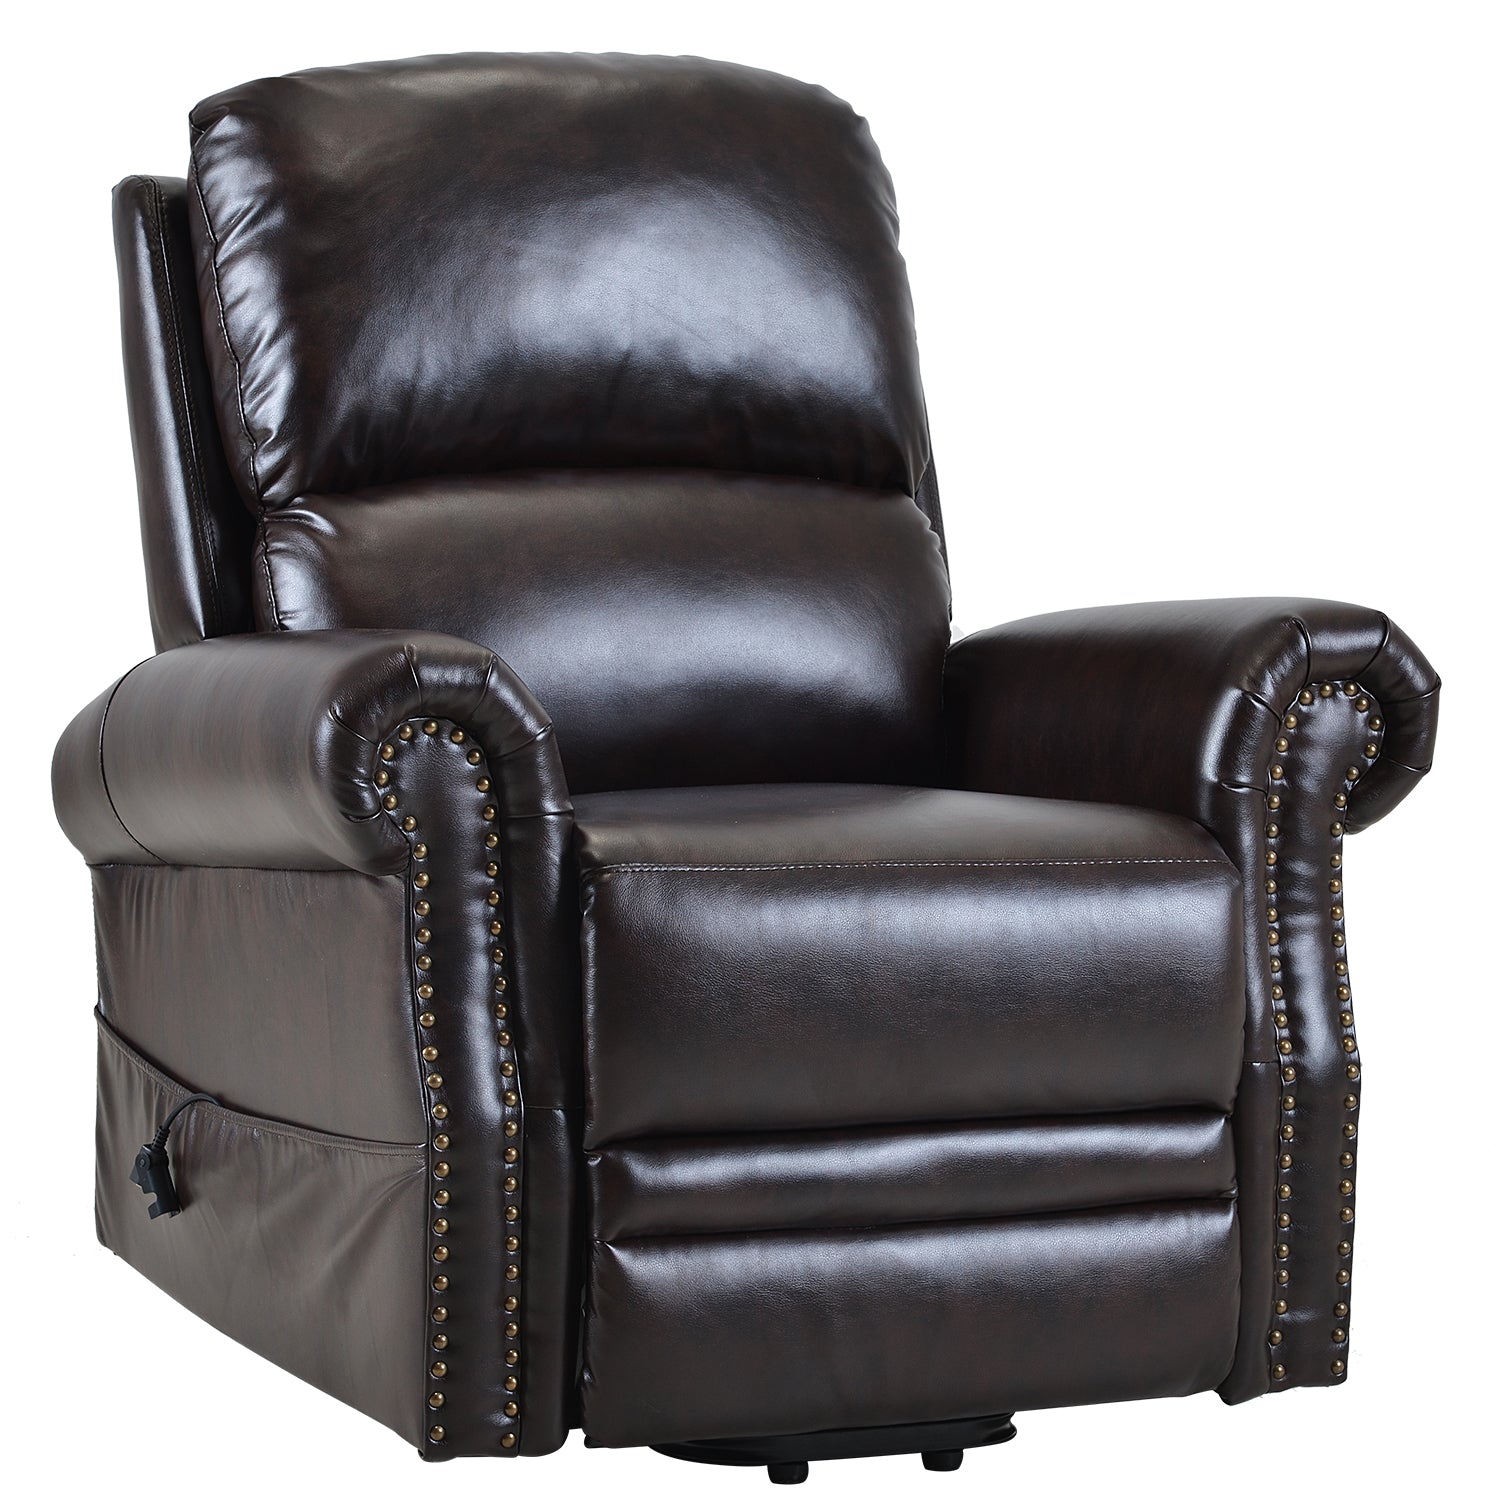 PU Leather Power Lift Recliner Chair with Remote-Boyel Living